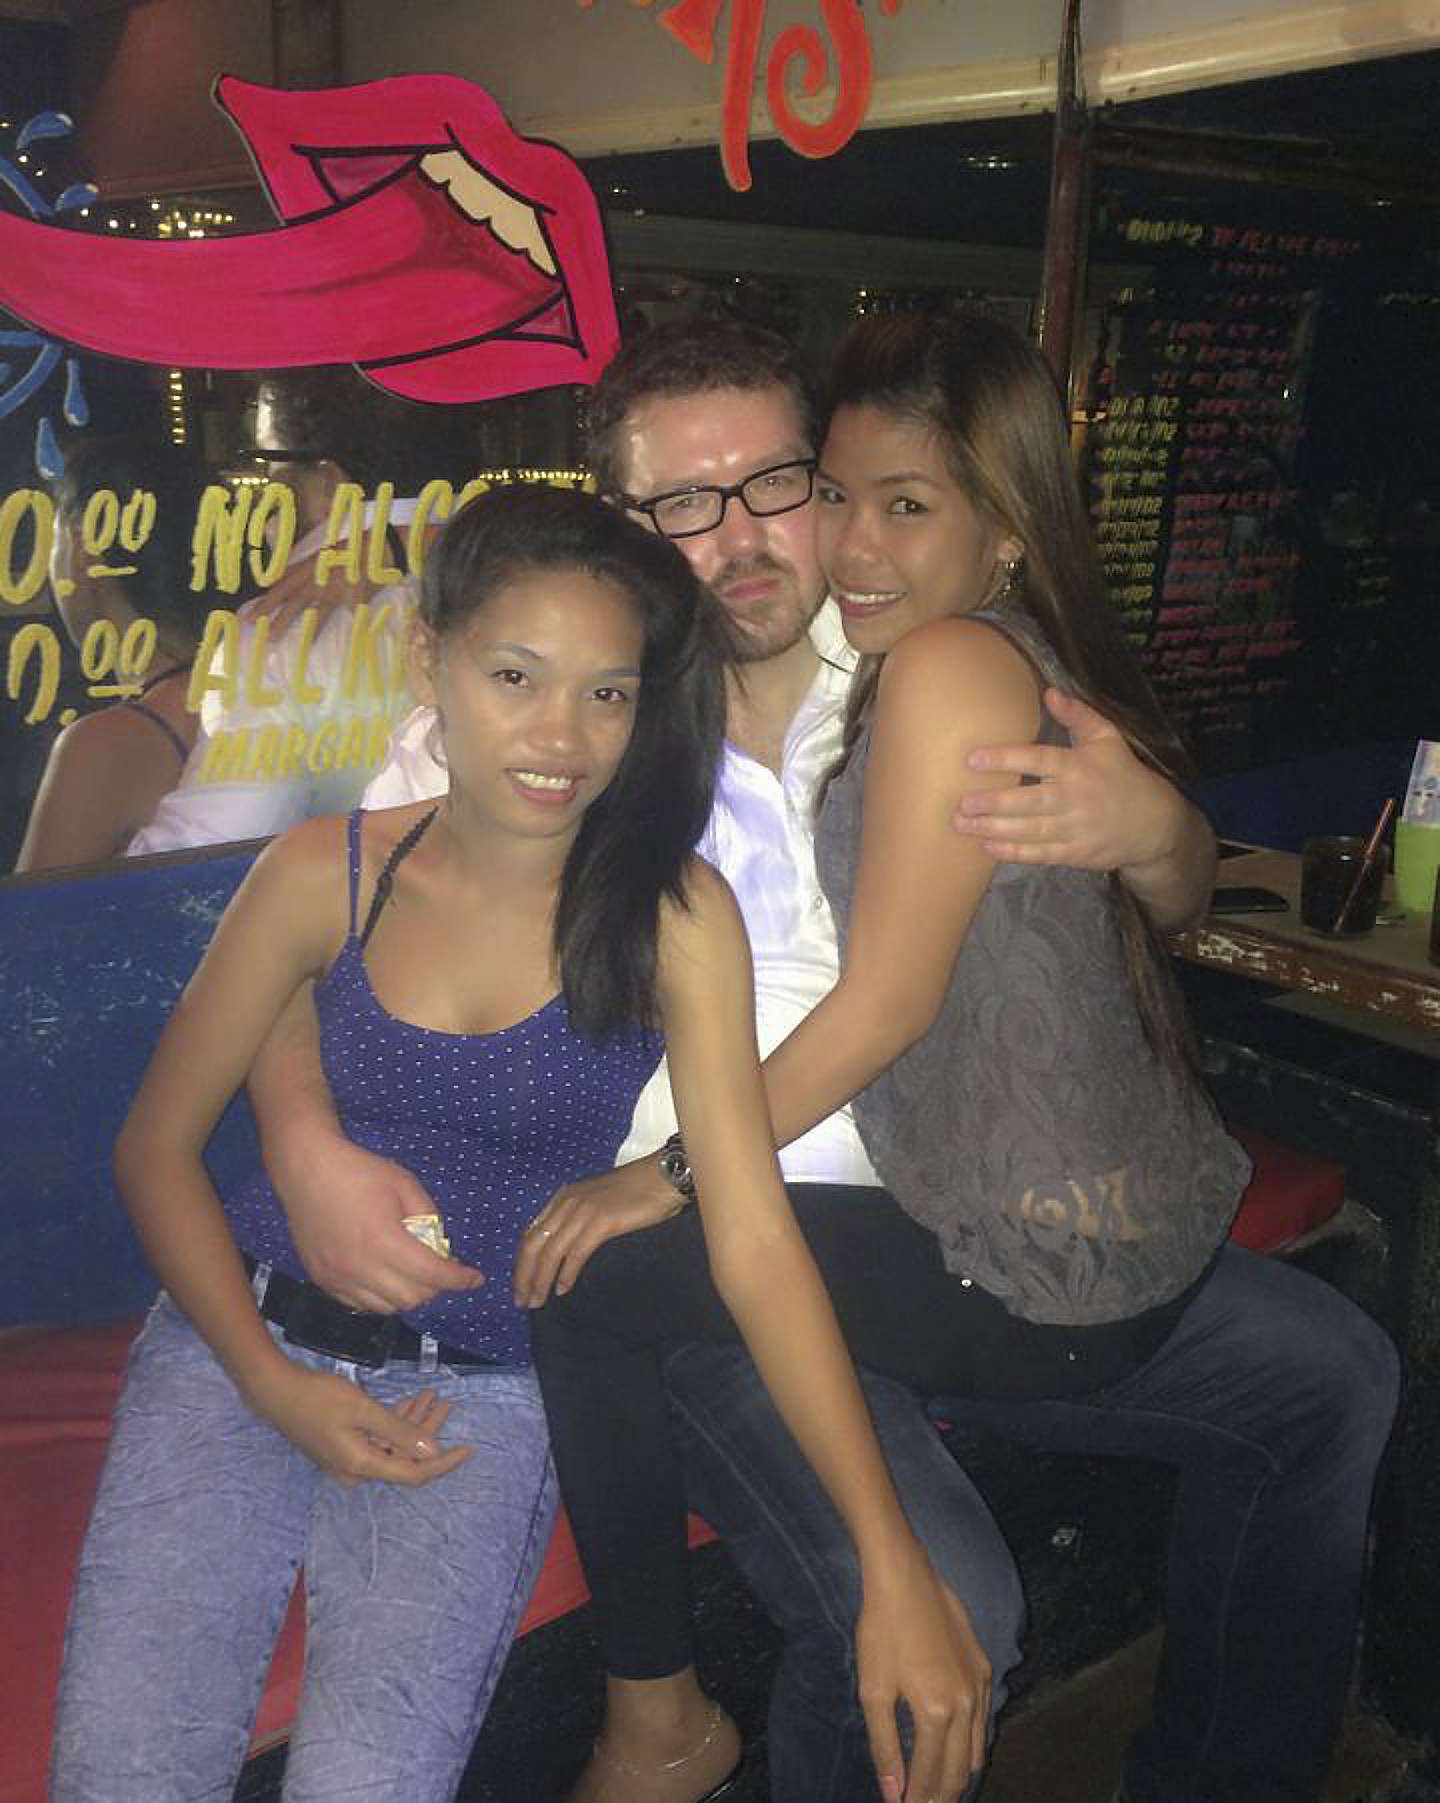 Rurik Jutting with his last girlfriend Joanna Mendoza (right) and another girl in Club Rio, Angeles City. Picture: Red Door News Hong Kong